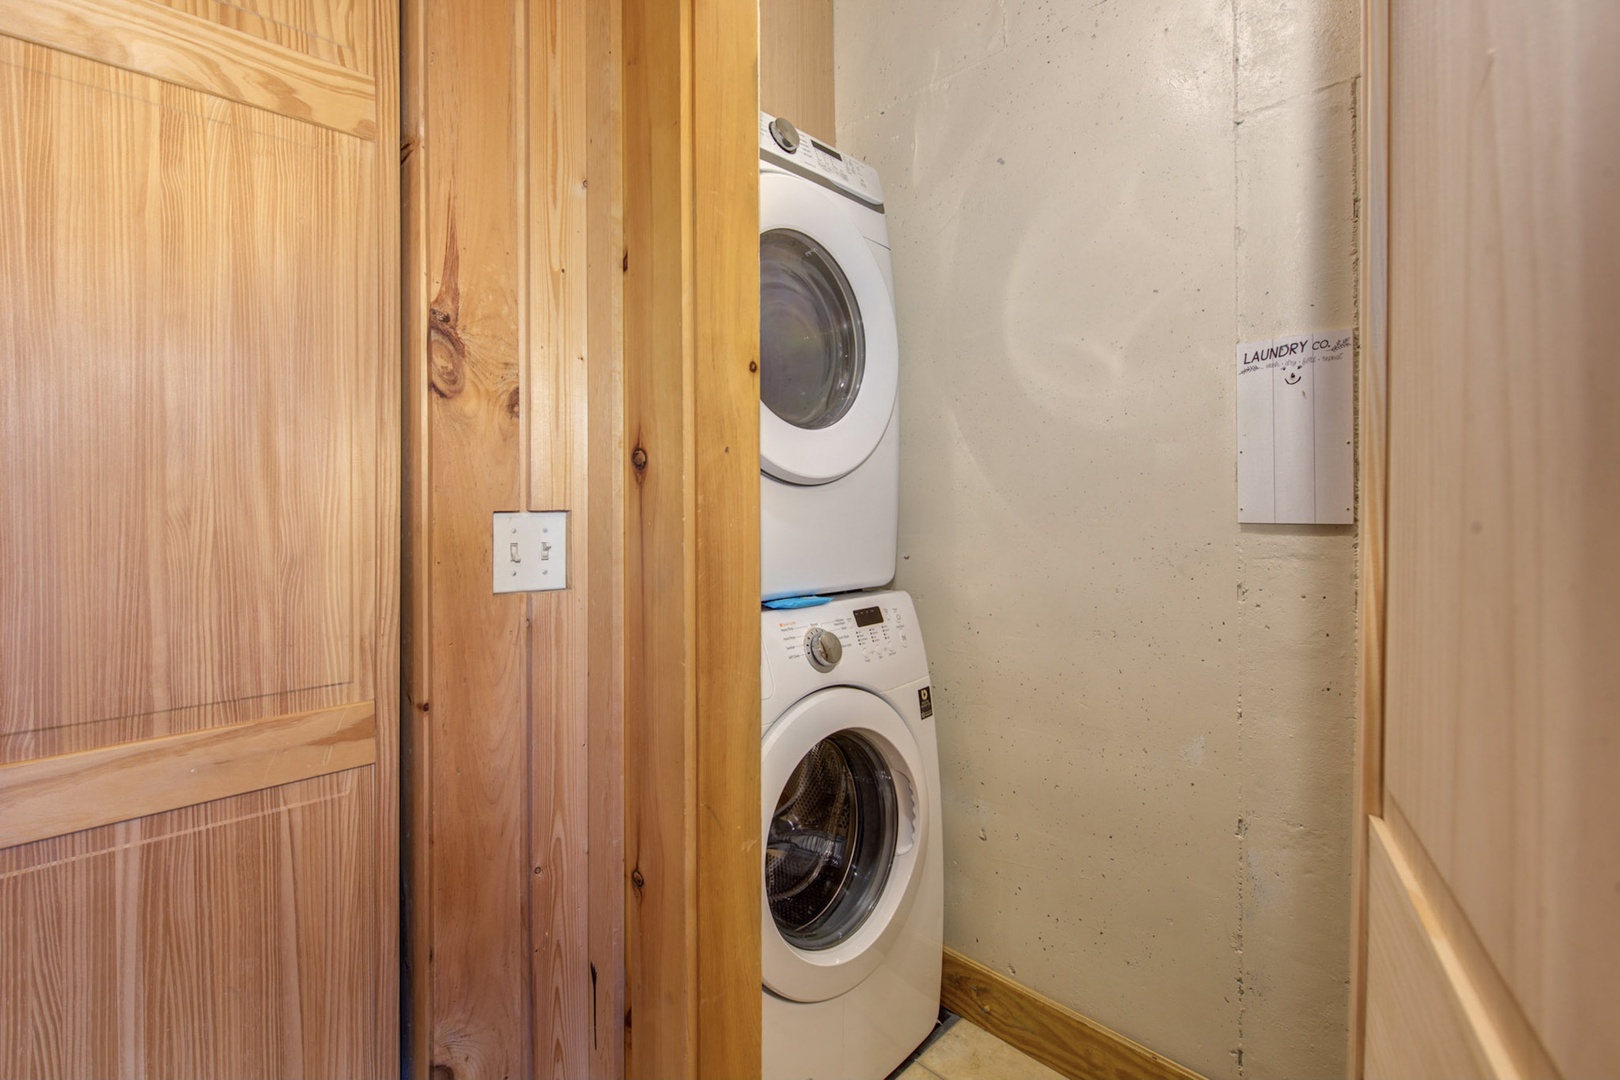 Private laundry is available for your stay, located in a private laundry closet